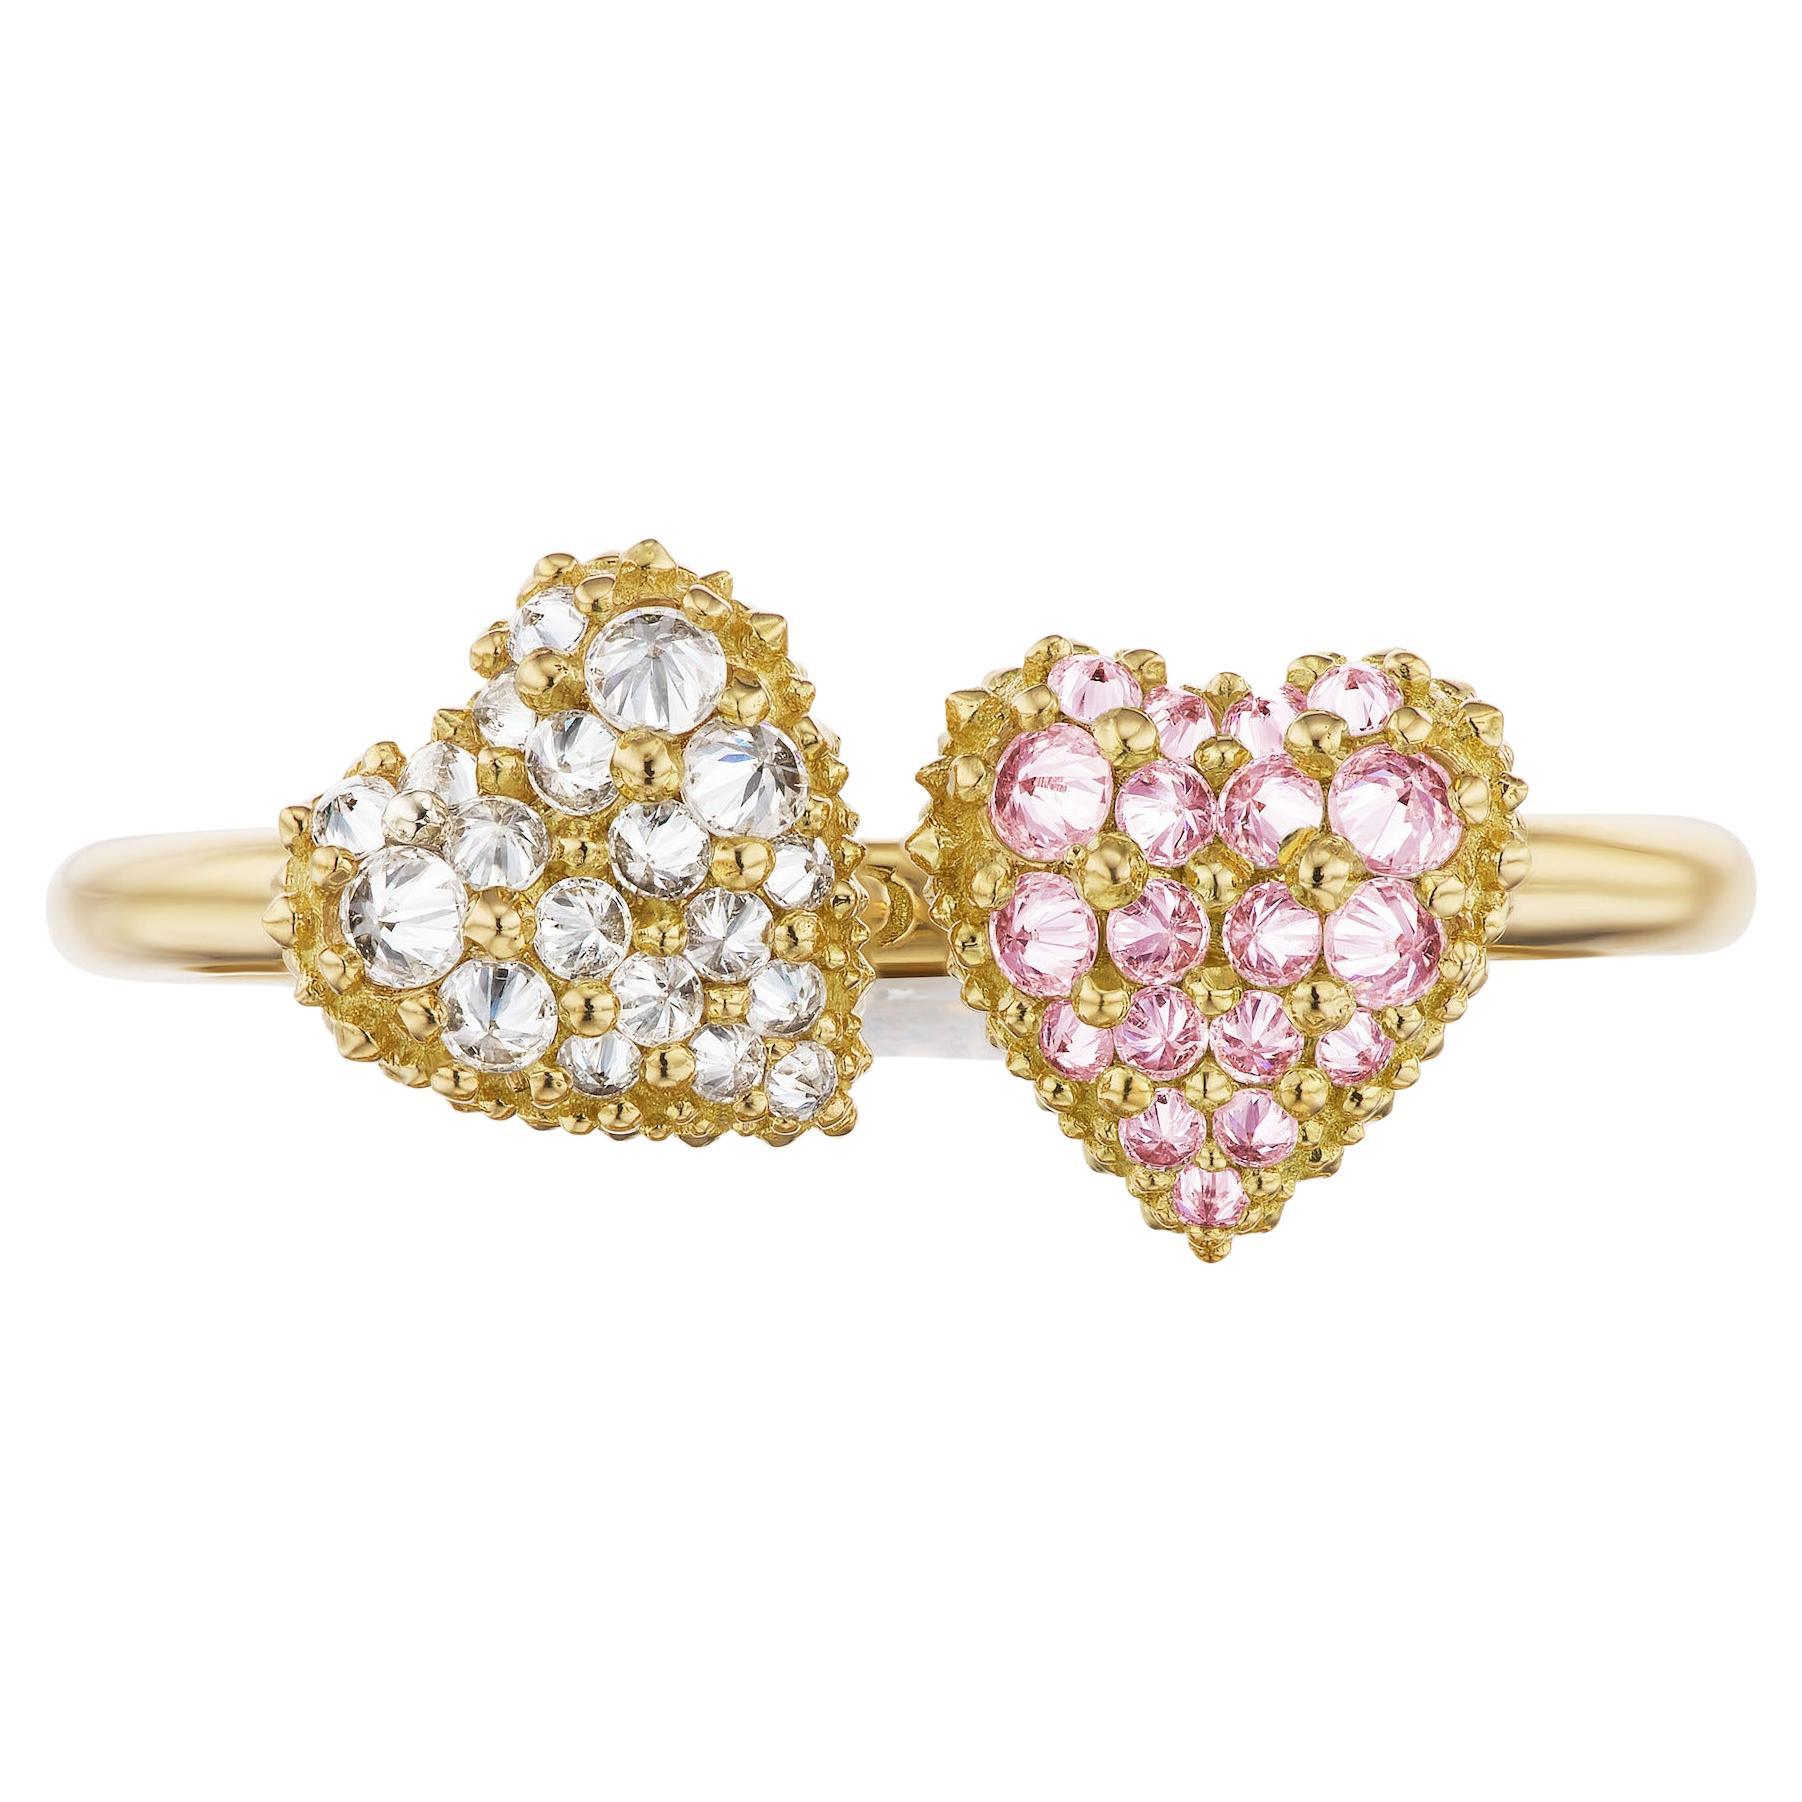 For Sale:  AnaKatarina Diamond, Pink Sapphire, and 18k Yellow Gold 'Moi et Toi' Ring